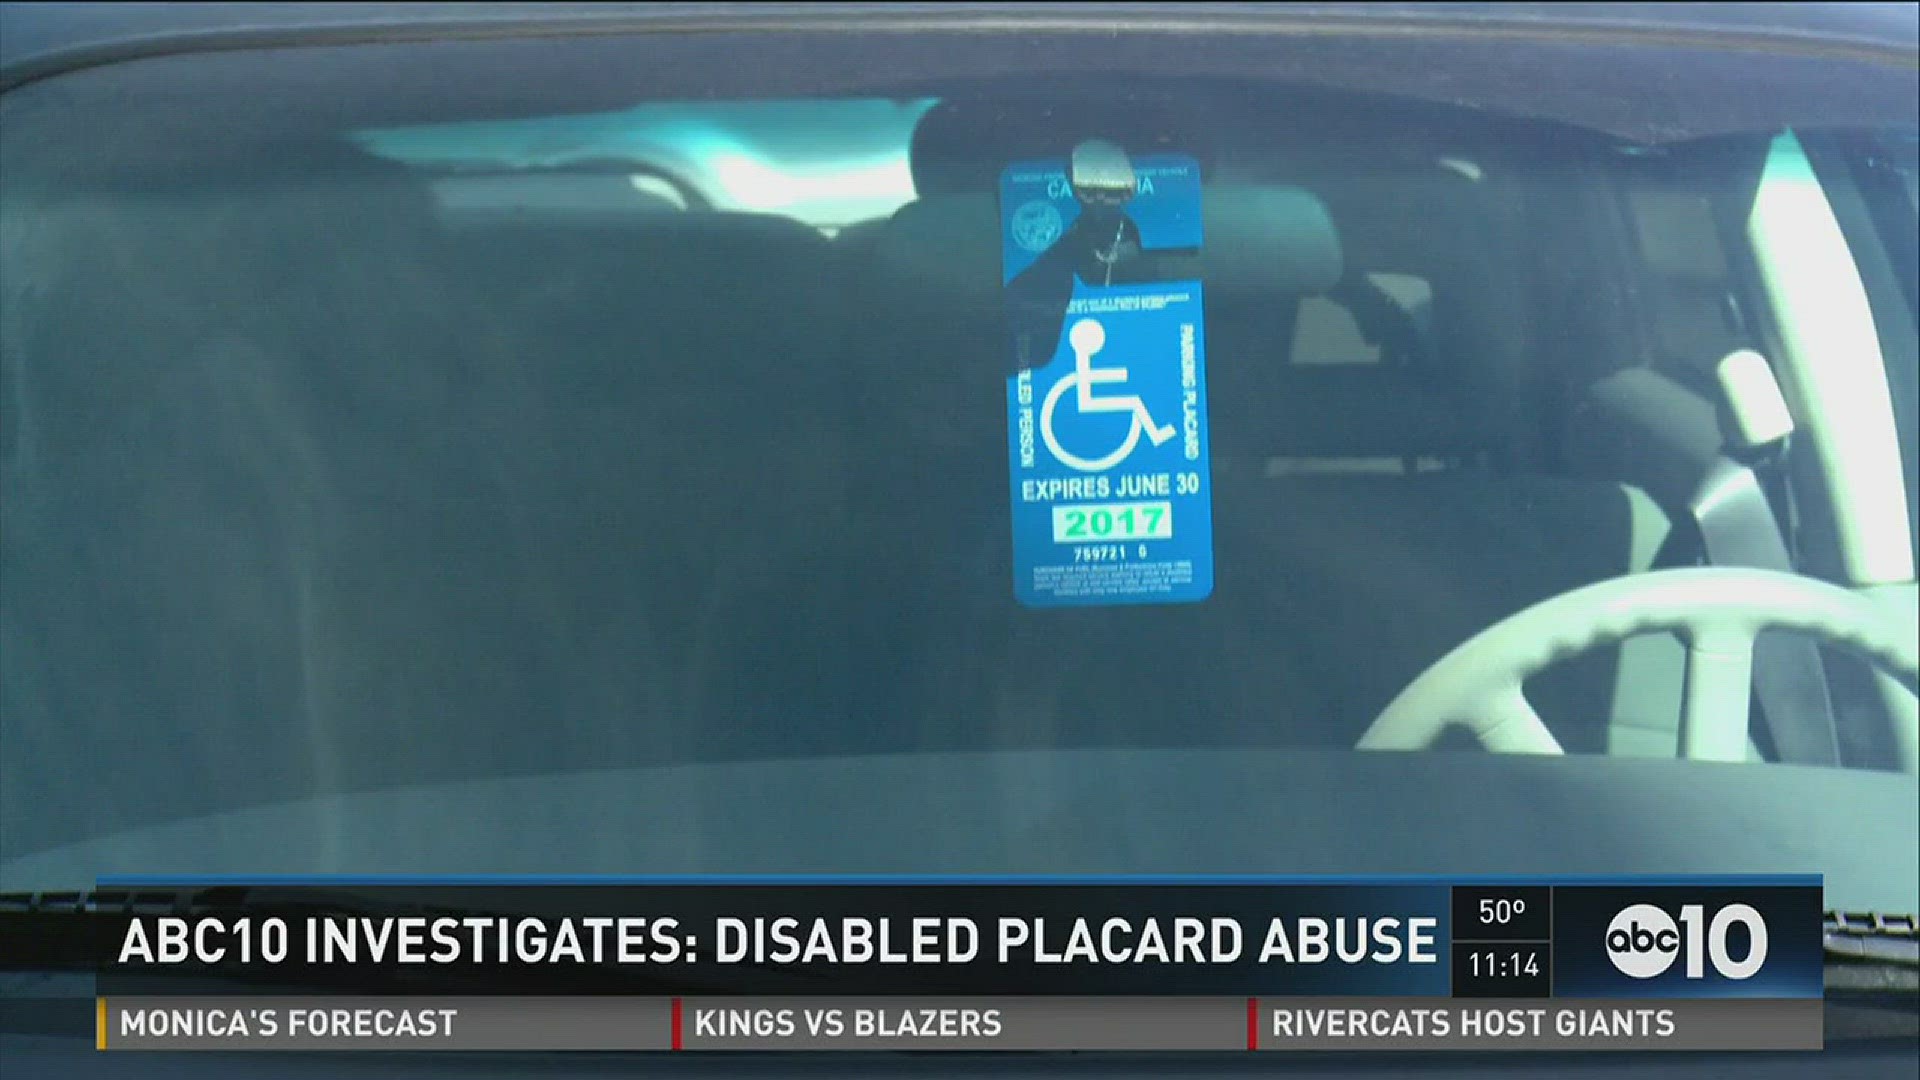 ABC10's Thom Jense hits the streets to find out how easy it is to get a Disabled Parking placard if you're not a disabled person.